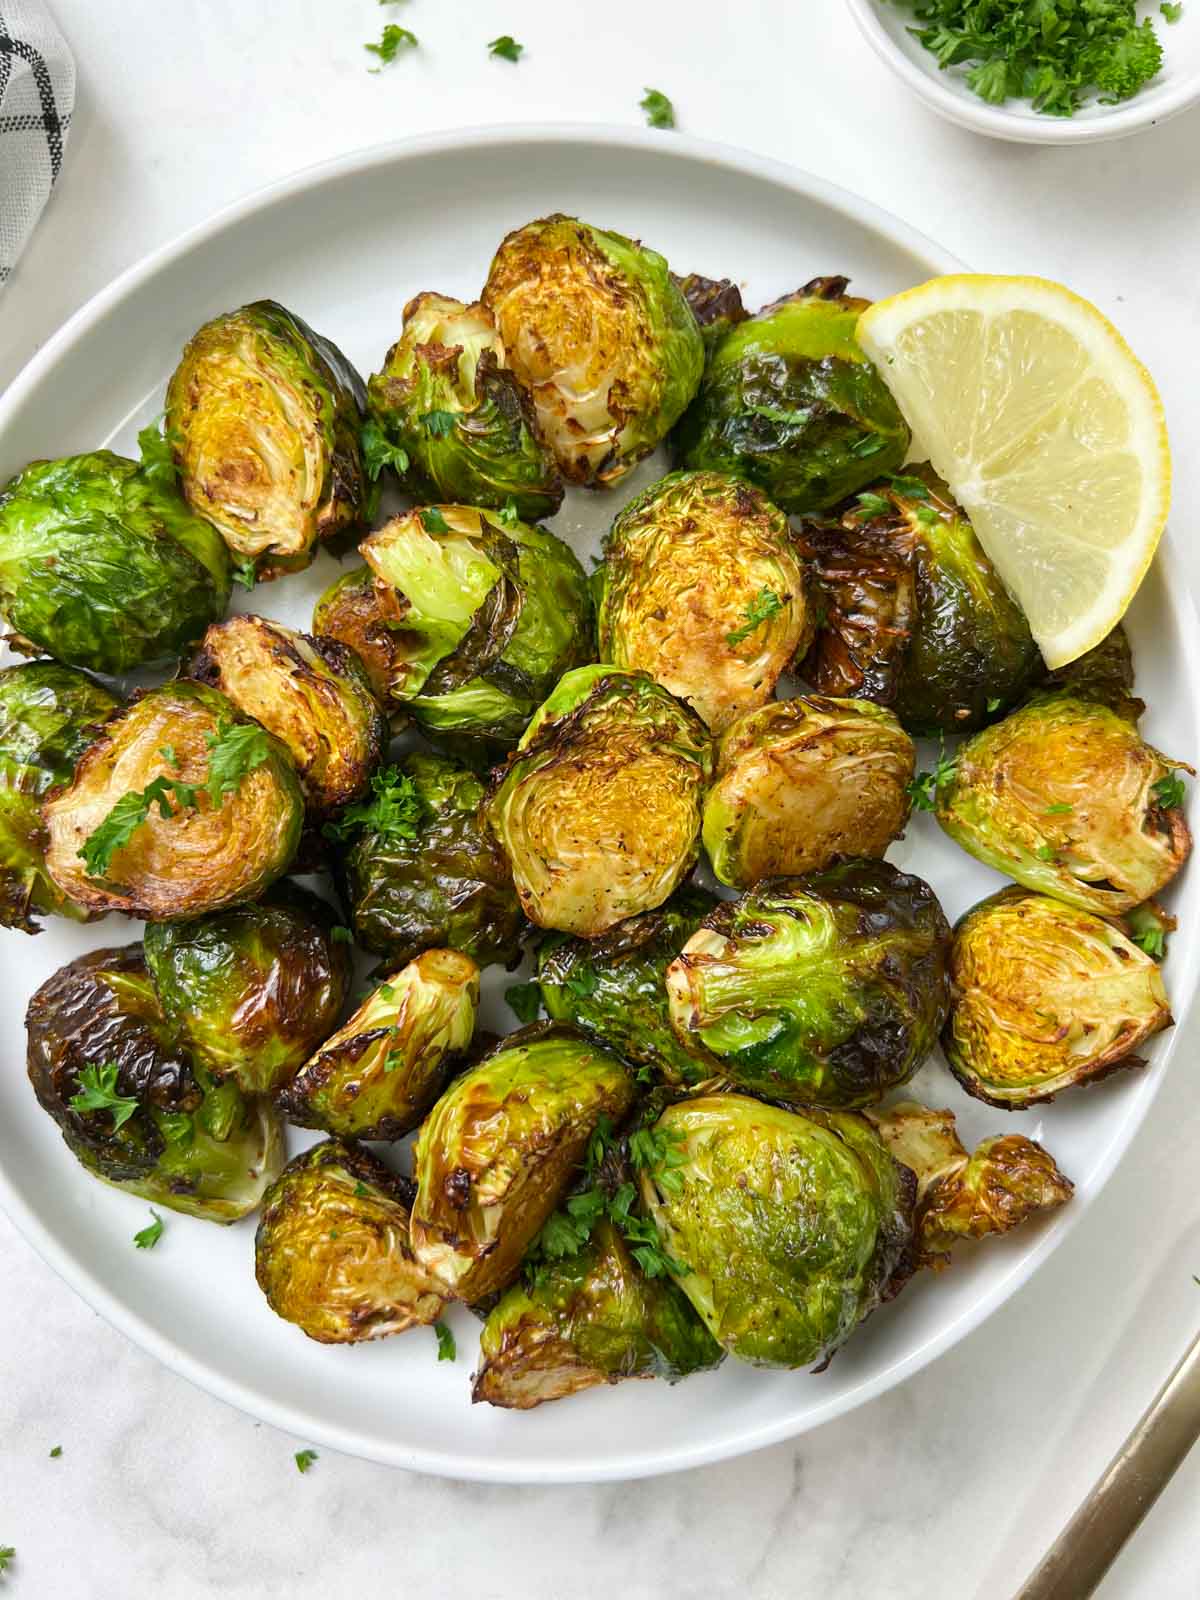 roasted brussels sprouts served in a plate with lemon wedge on the side and garnished with parsley